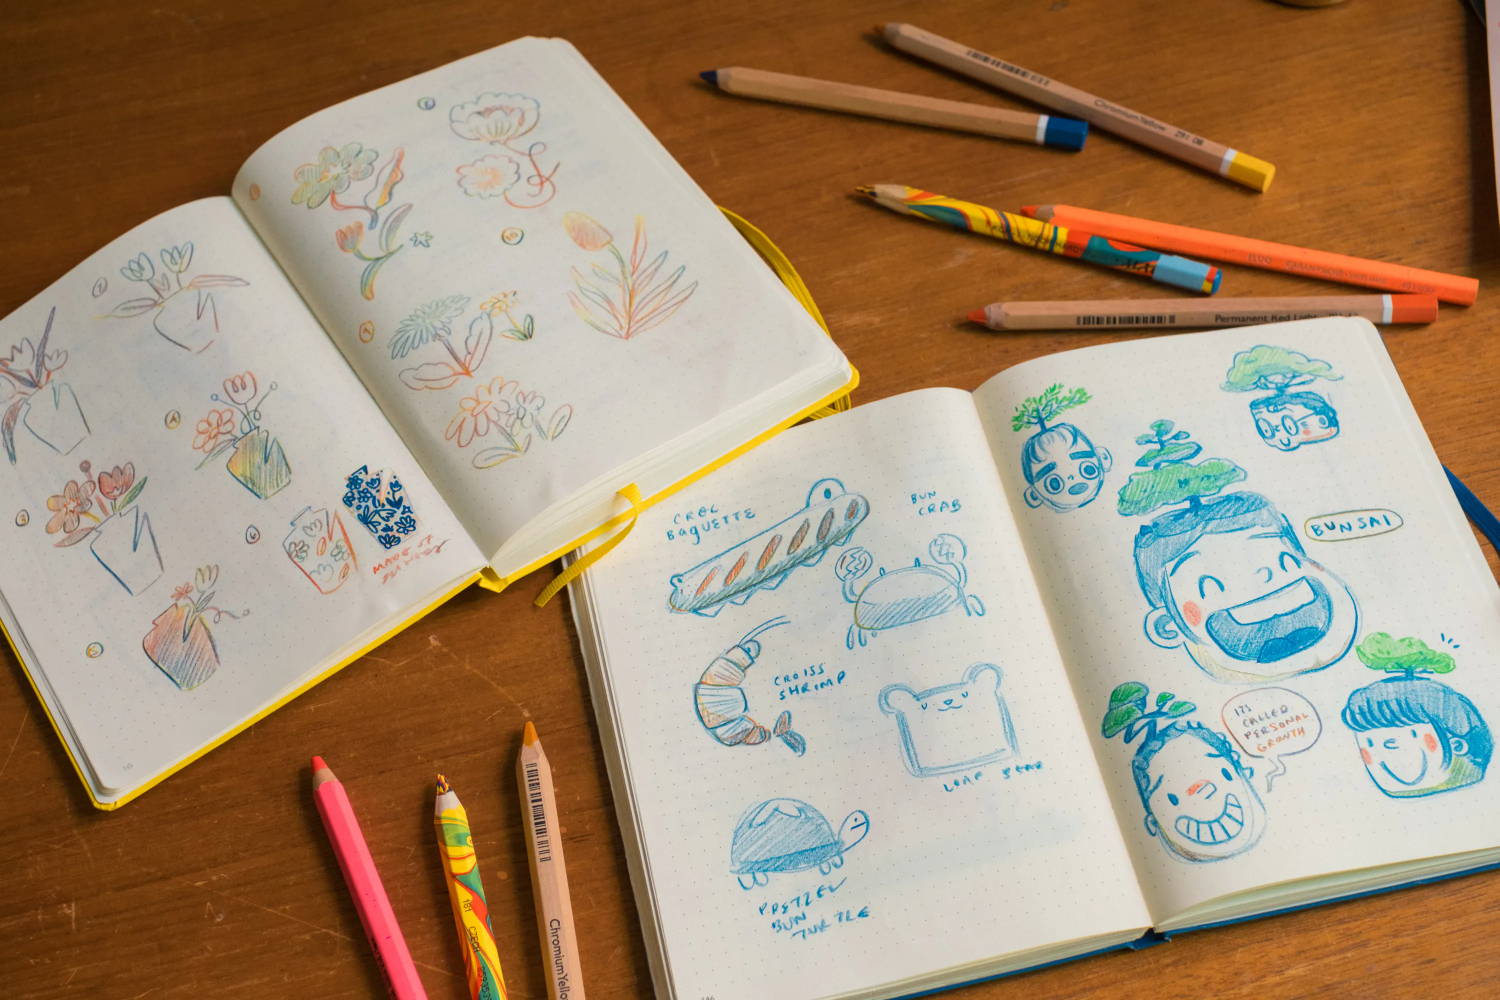 Two sketchbooks featuring colorful illustrations